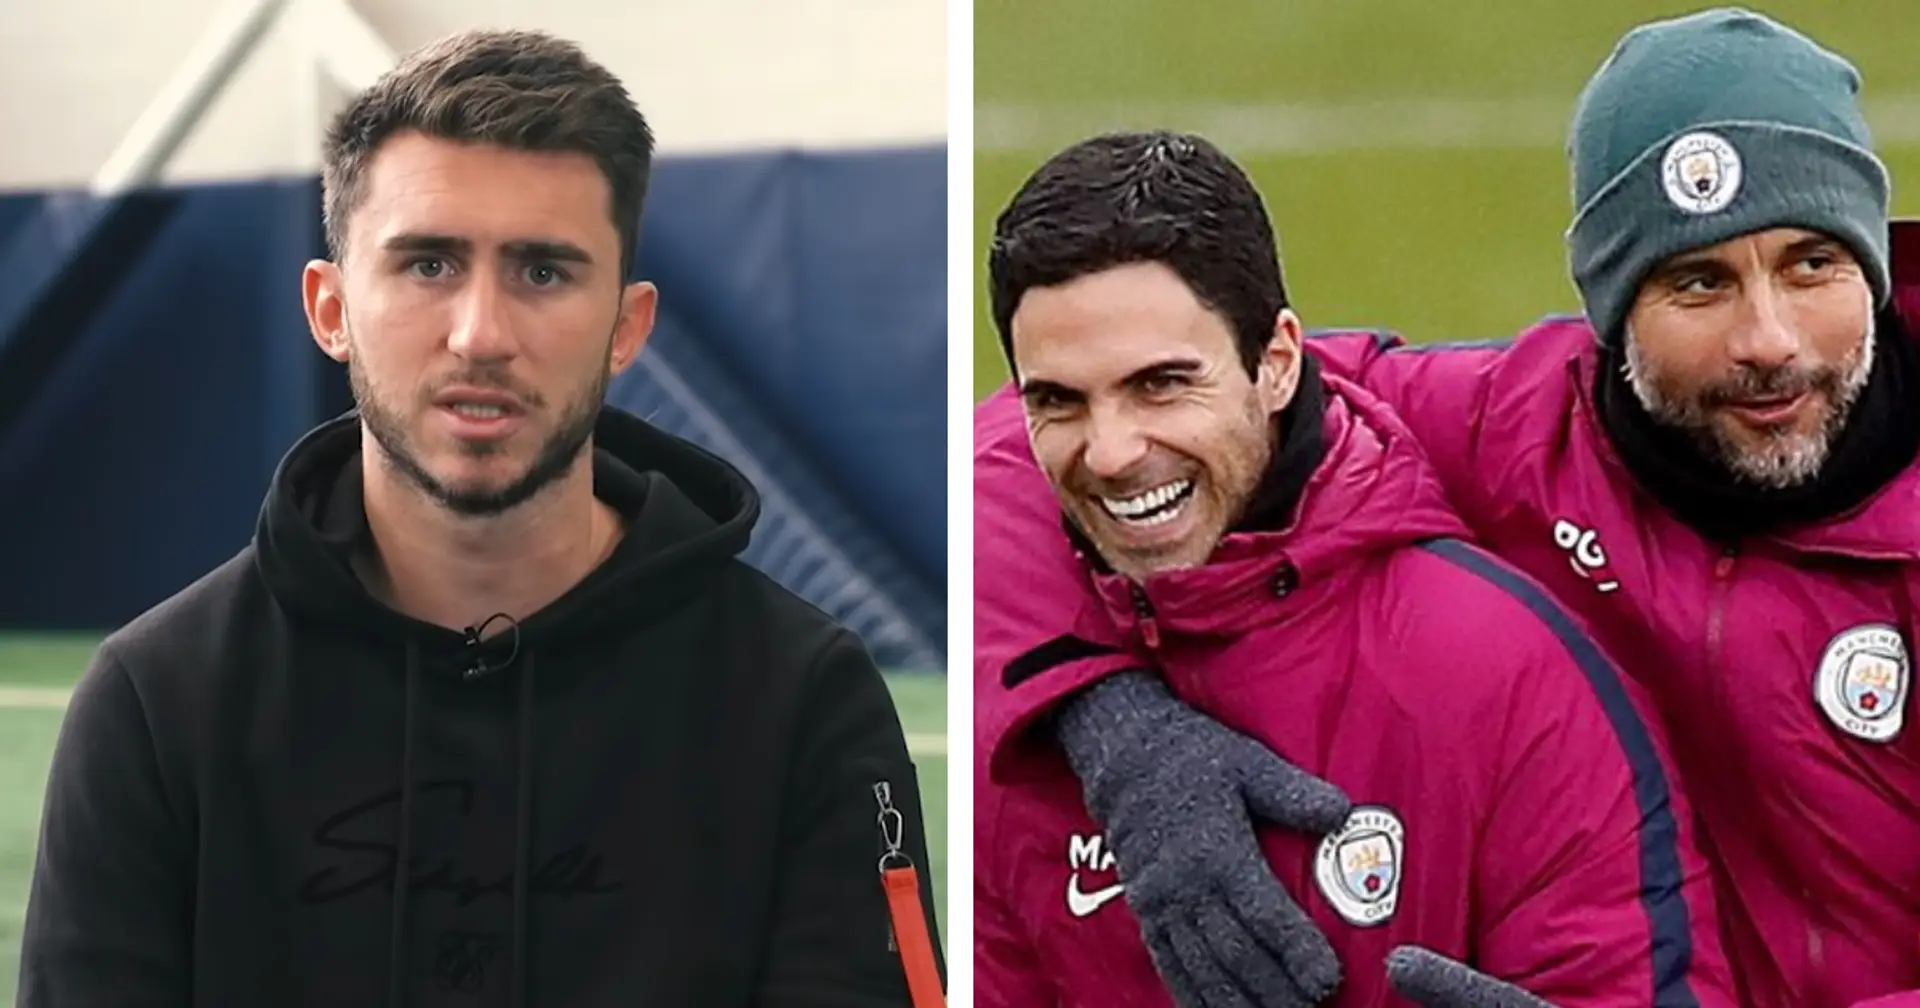 'Arteta knows our style of play': Man City's Aymeric Laporte reflects on 'fantastic' title race against Arsenal